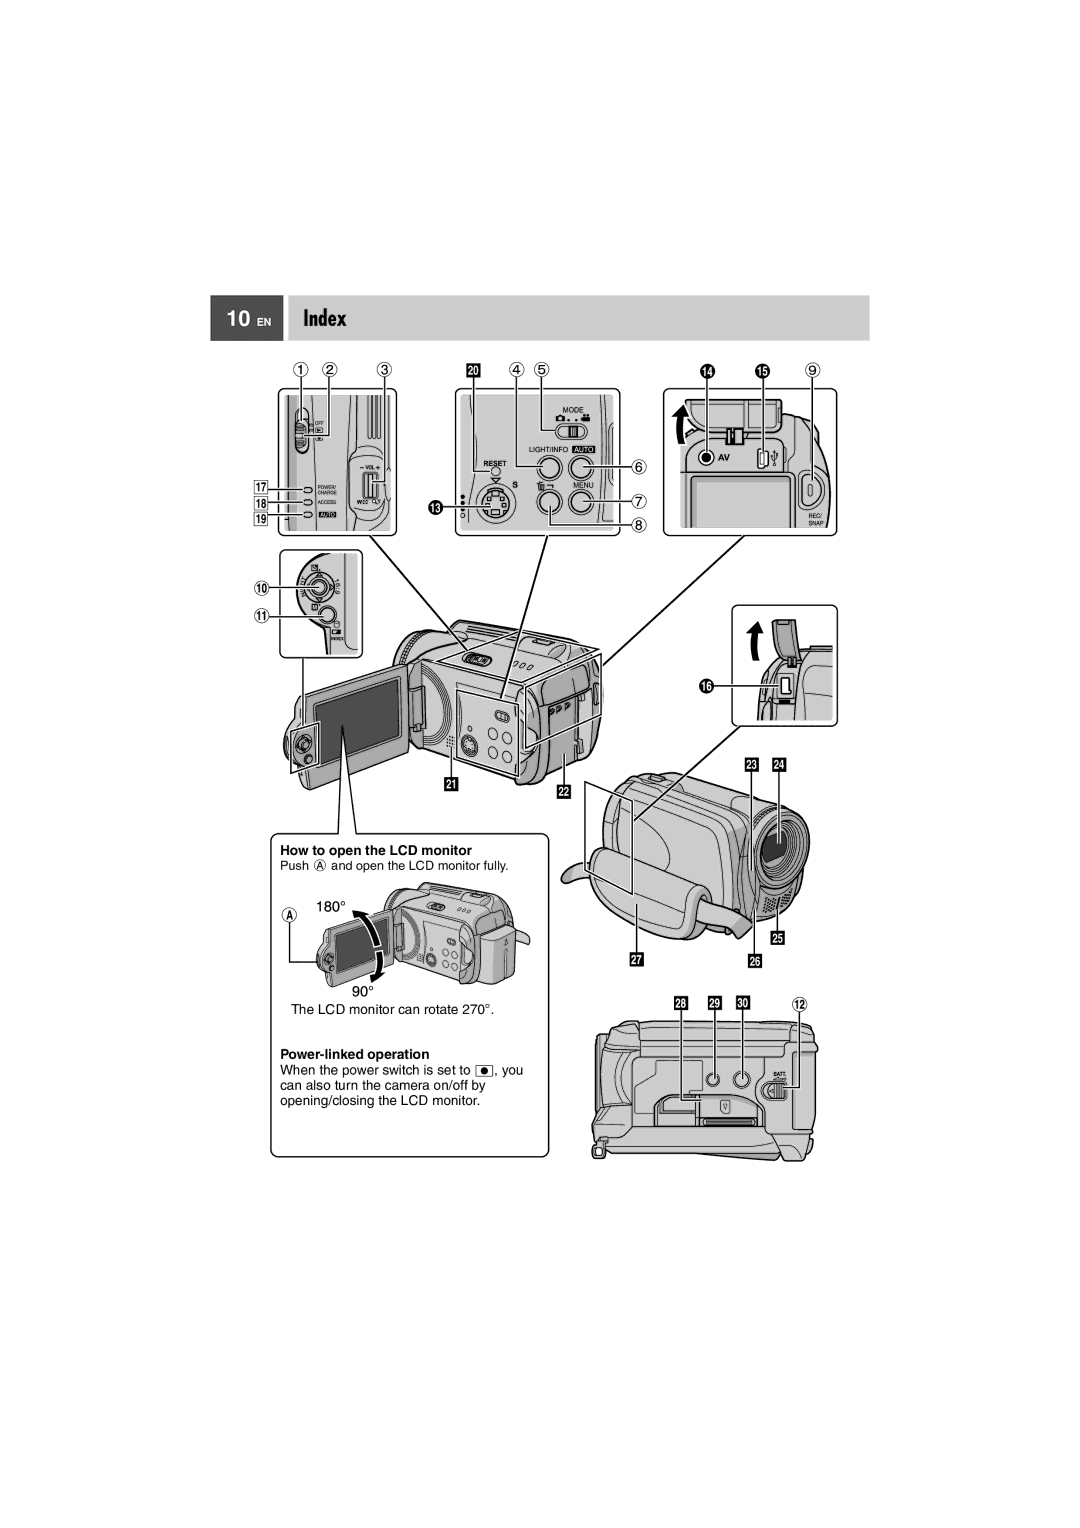 JVC GZ-MG37U, GZ-MG27U manual EN Index, How to open the LCD monitor, LCD monitor can rotate, Power-linked operation 